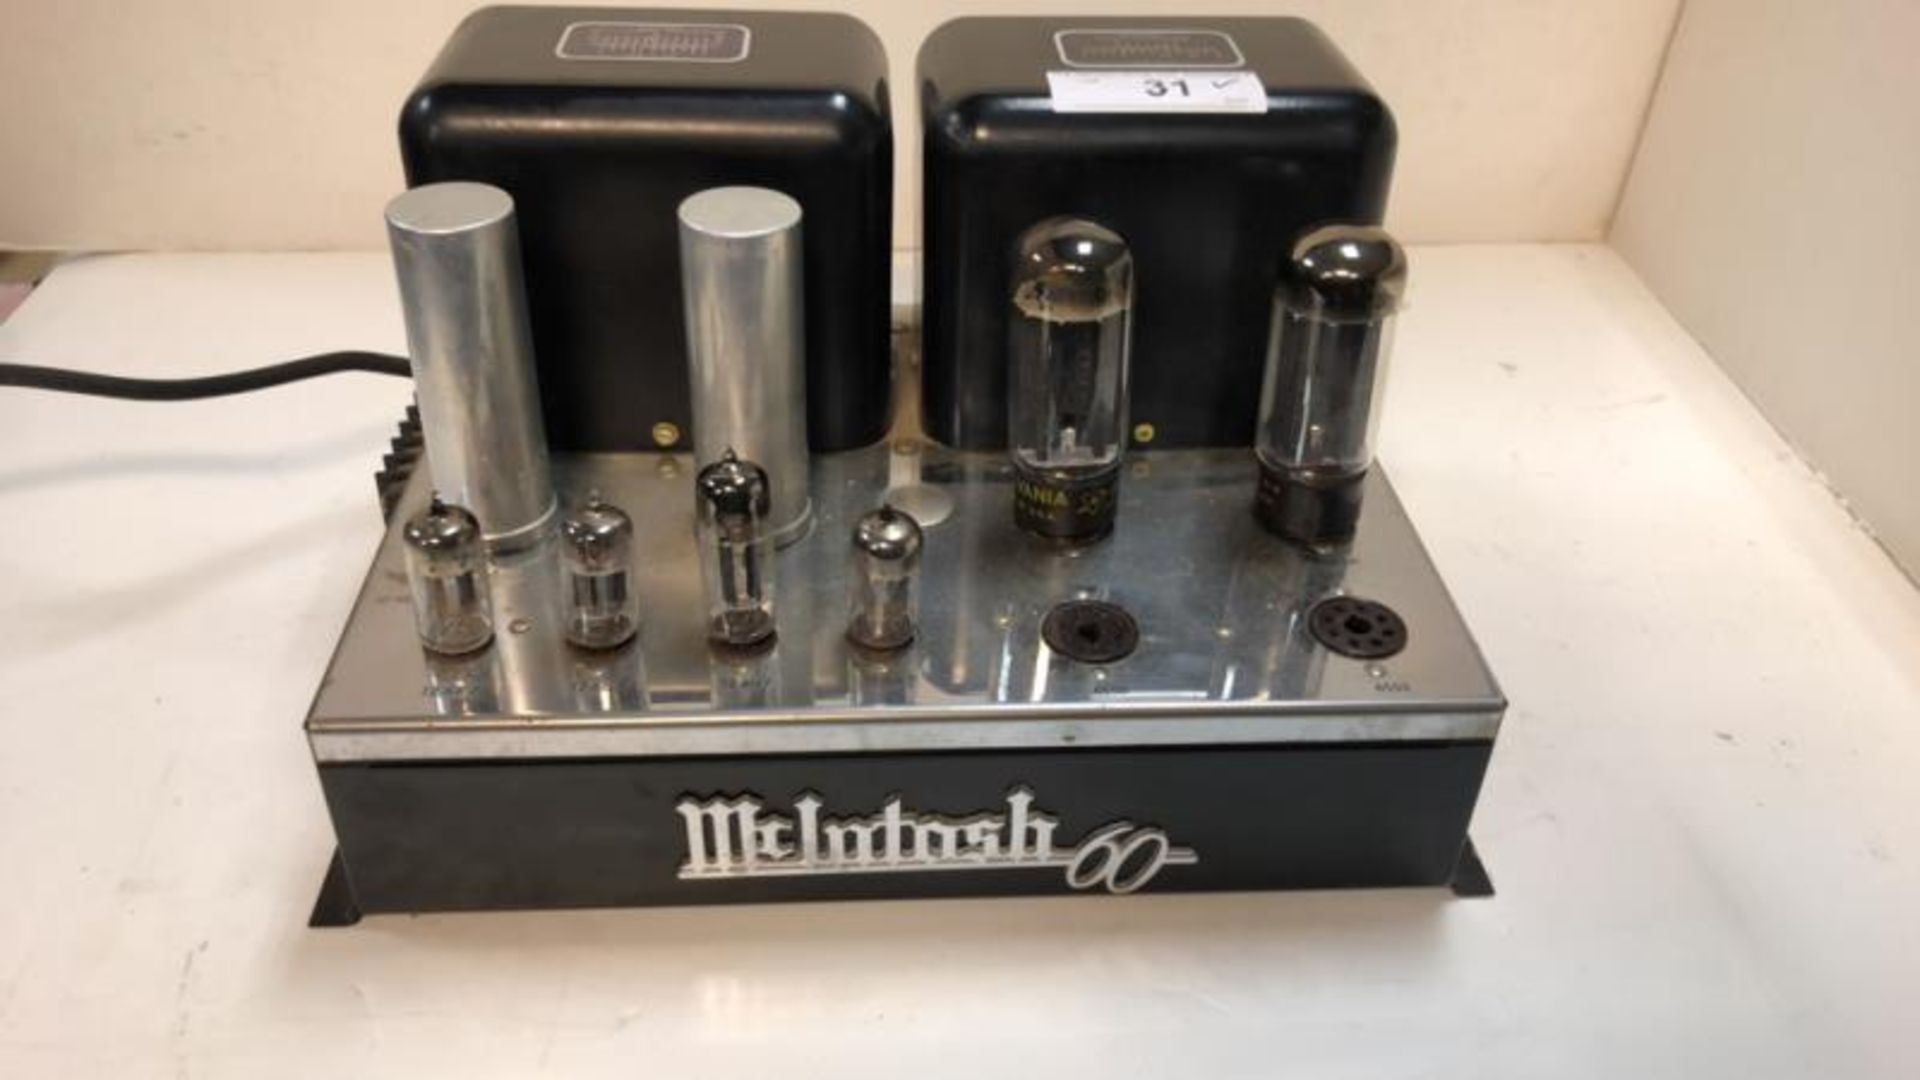 McIntosh MC 60, stereo tube power amp, missing tubes, sn # 5808, pitted, tested - powers up